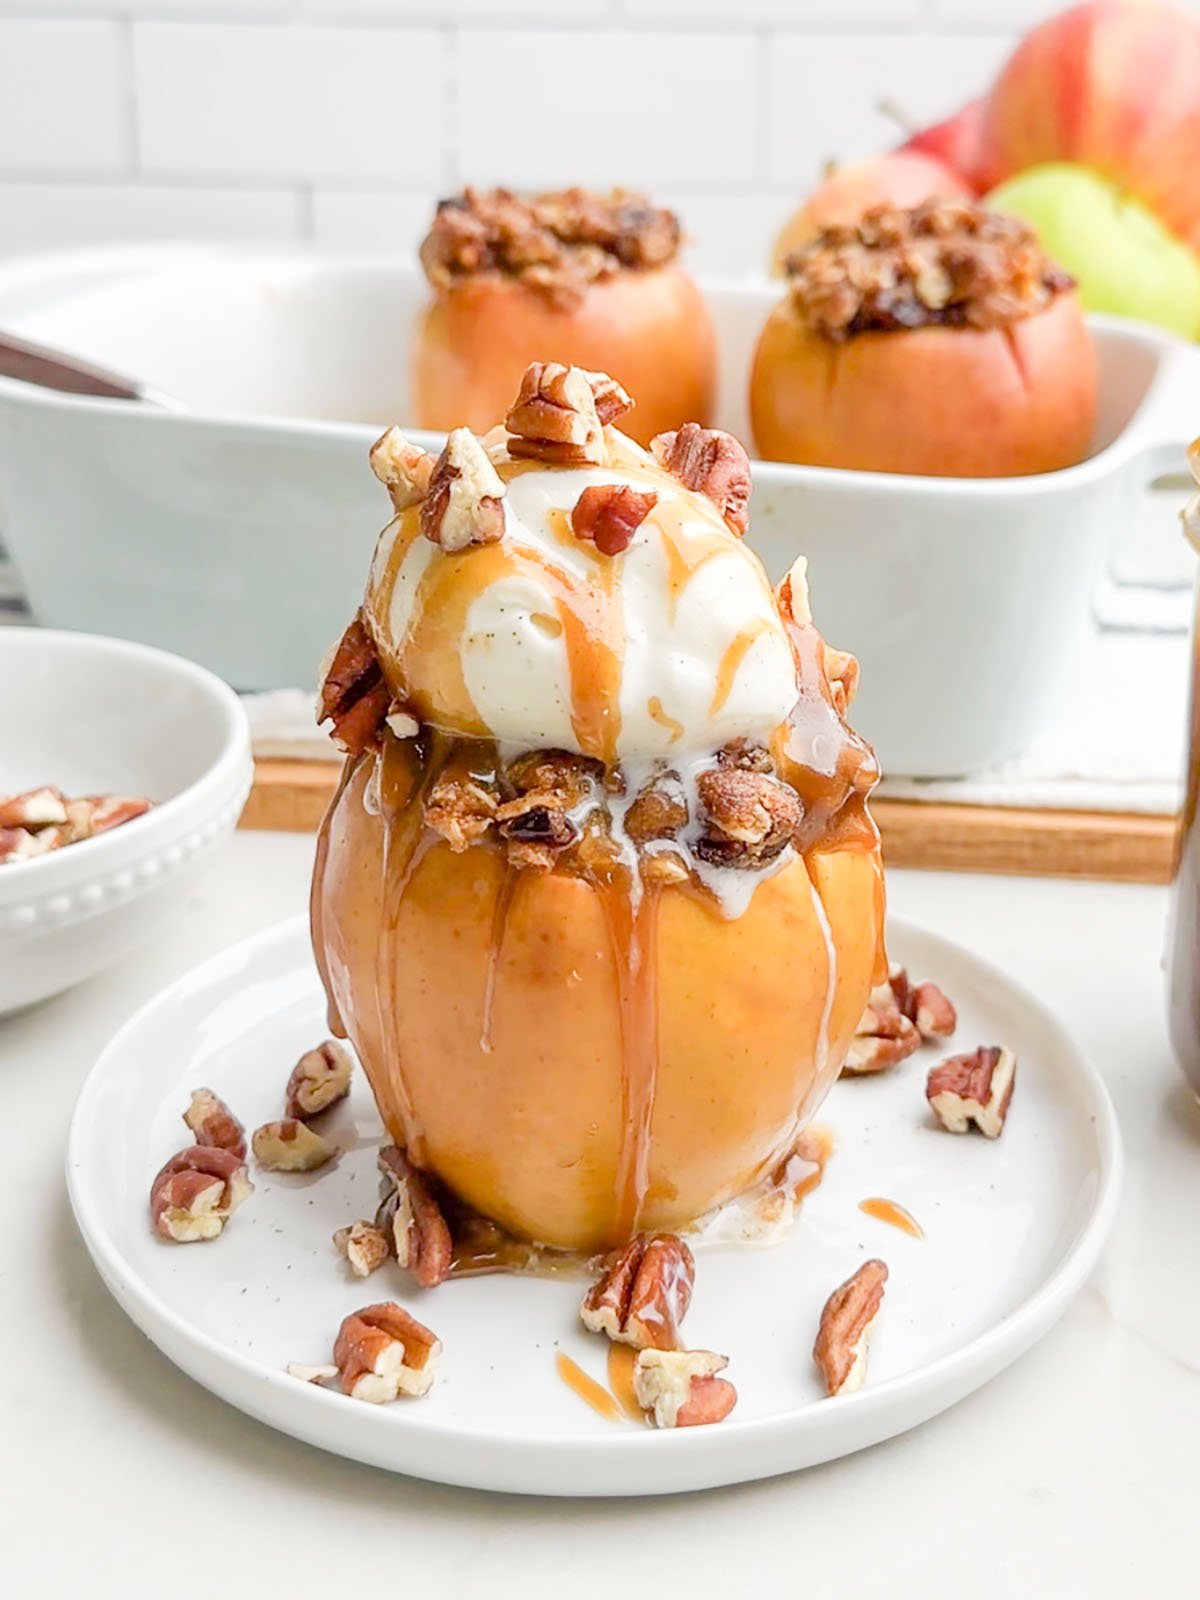 baked cinnamon apple topped with ice cream and caramel sauce